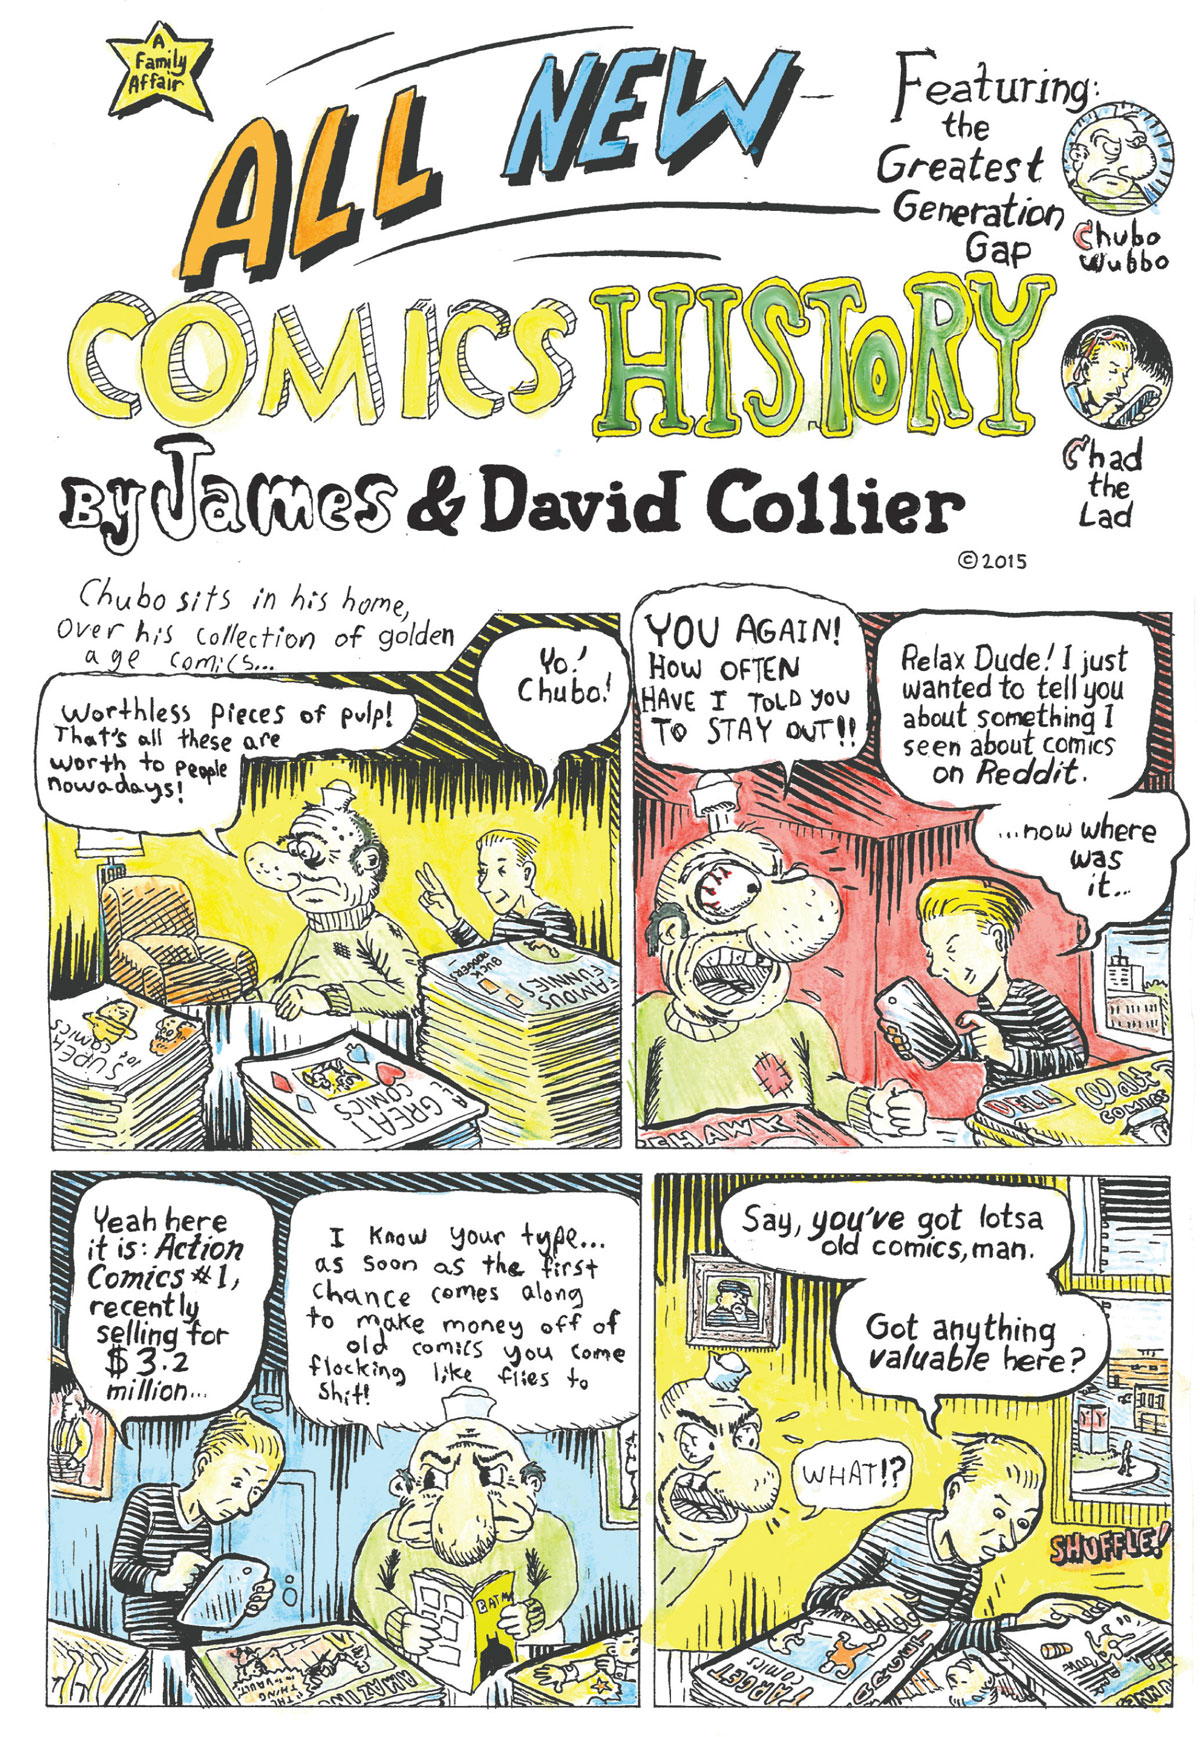 Comic by David and James Collier